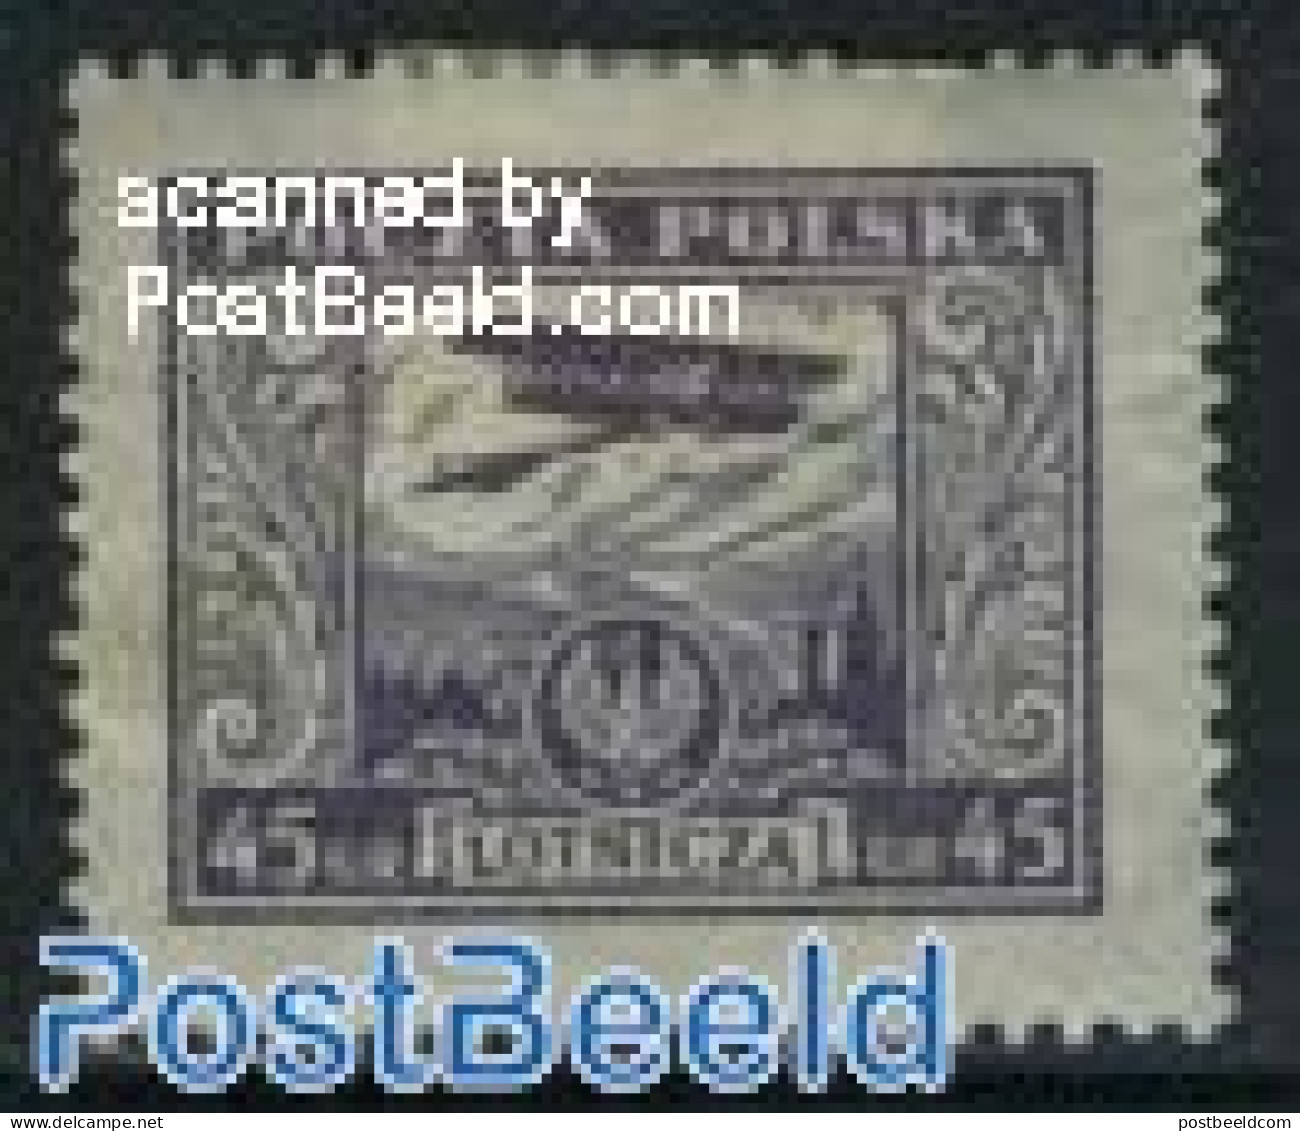 Poland 1925 45Gr., Stamp Out Of Set, Unused (hinged), Transport - Aircraft & Aviation - Ungebraucht